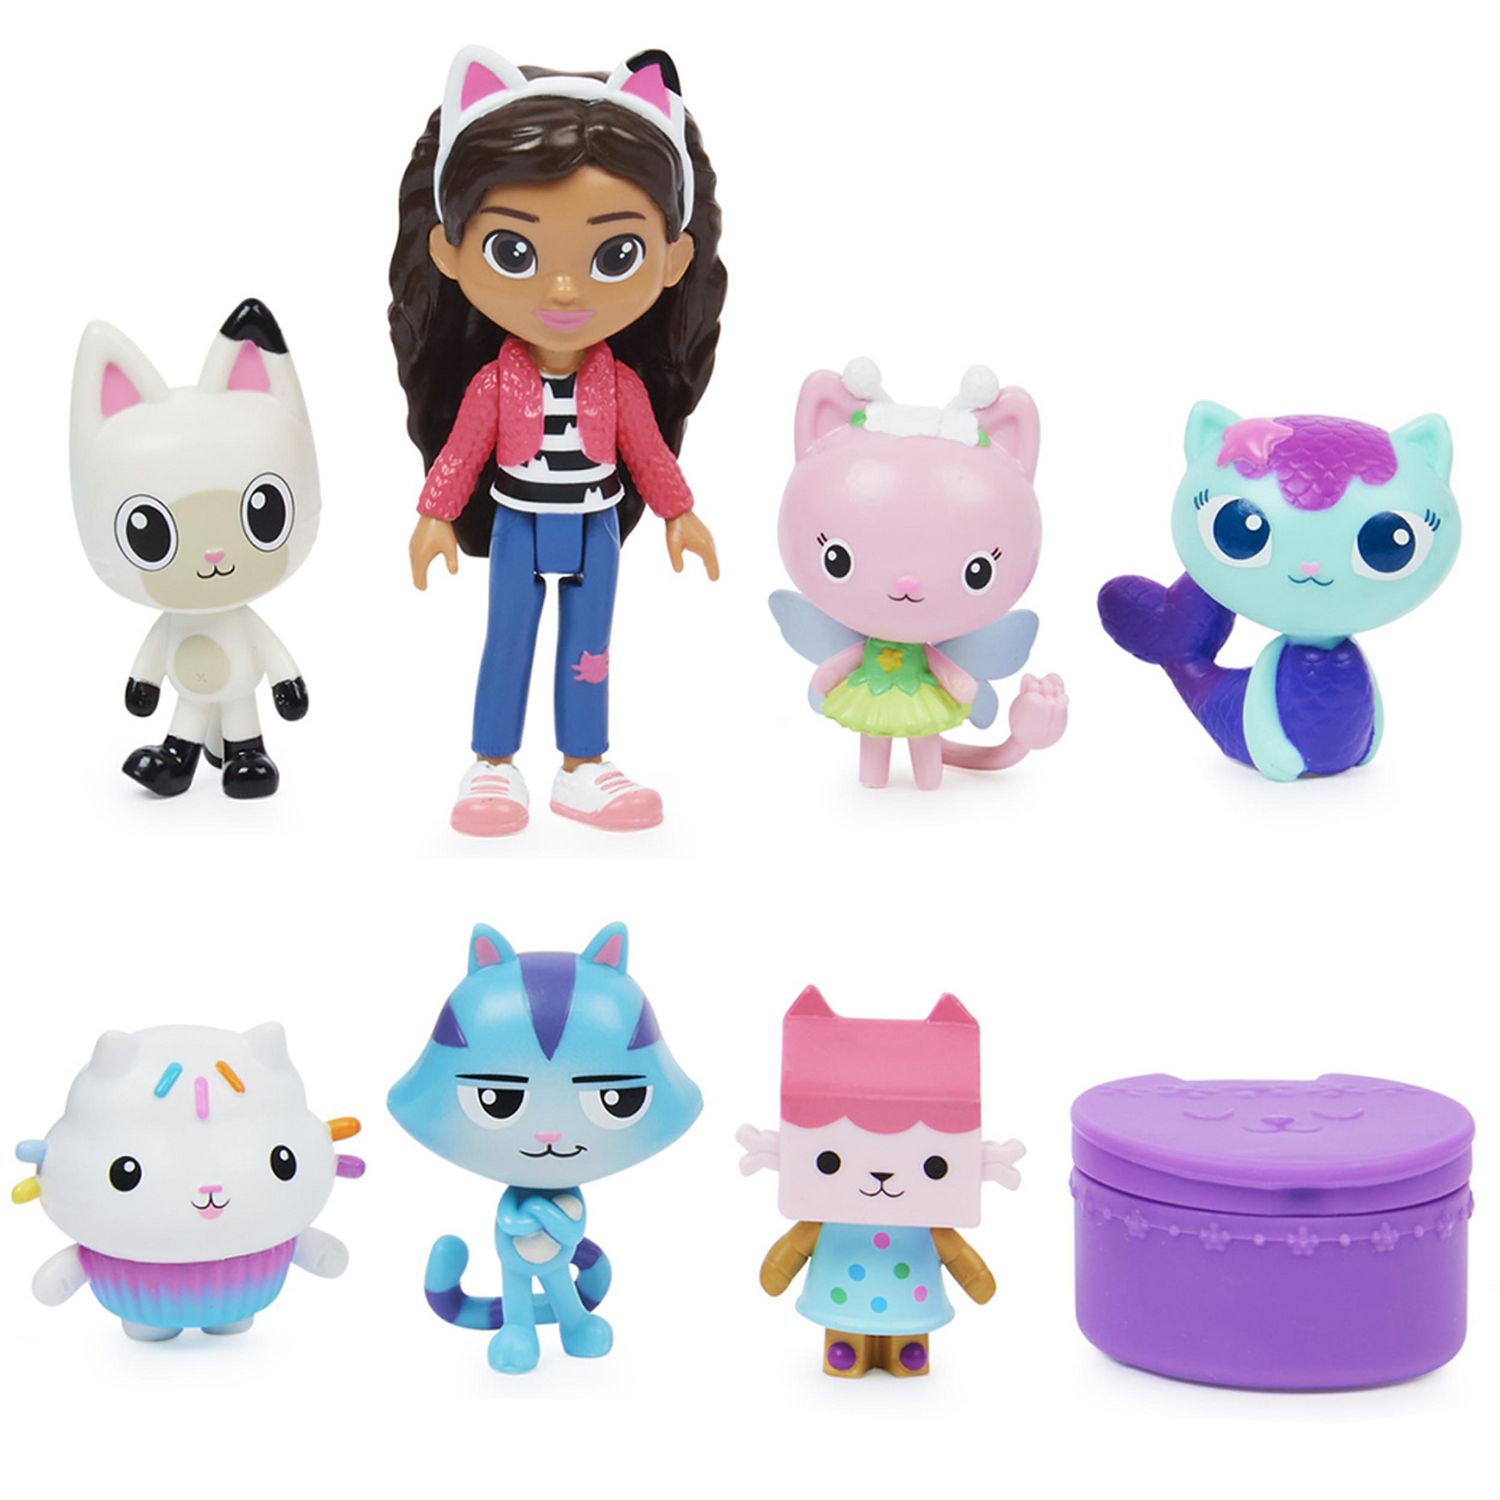 Gabby’s Dollhouse, Deluxe Figure Gift Set with 7 Toy Figures and Surprise  Accessory, Kids Toys for Ages 3 and up